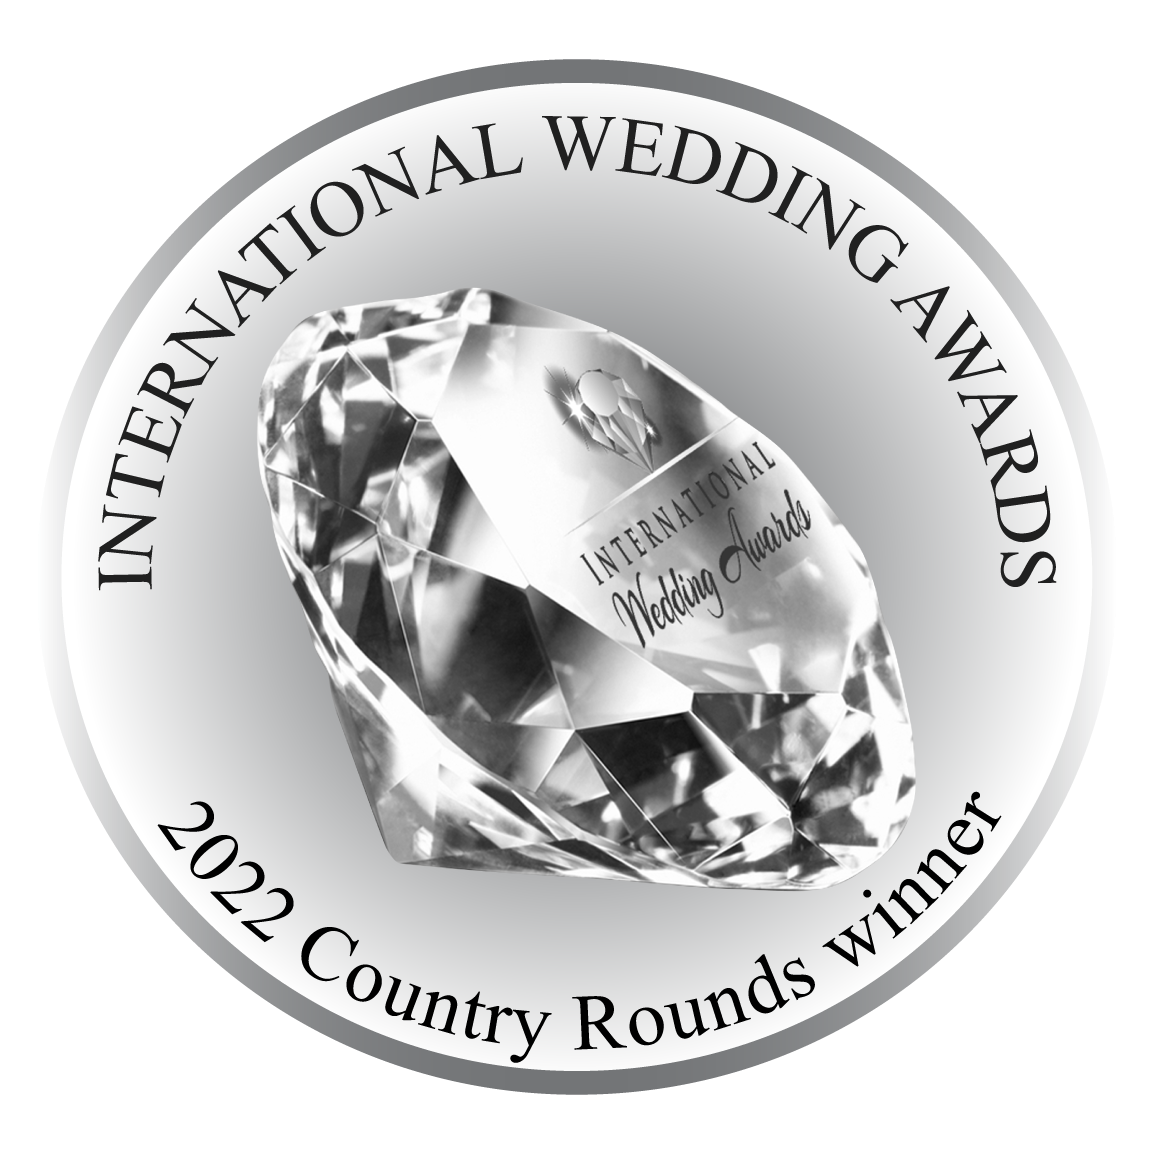 I won the International Wedding Award's Country Round for the United Kingdom in 2022